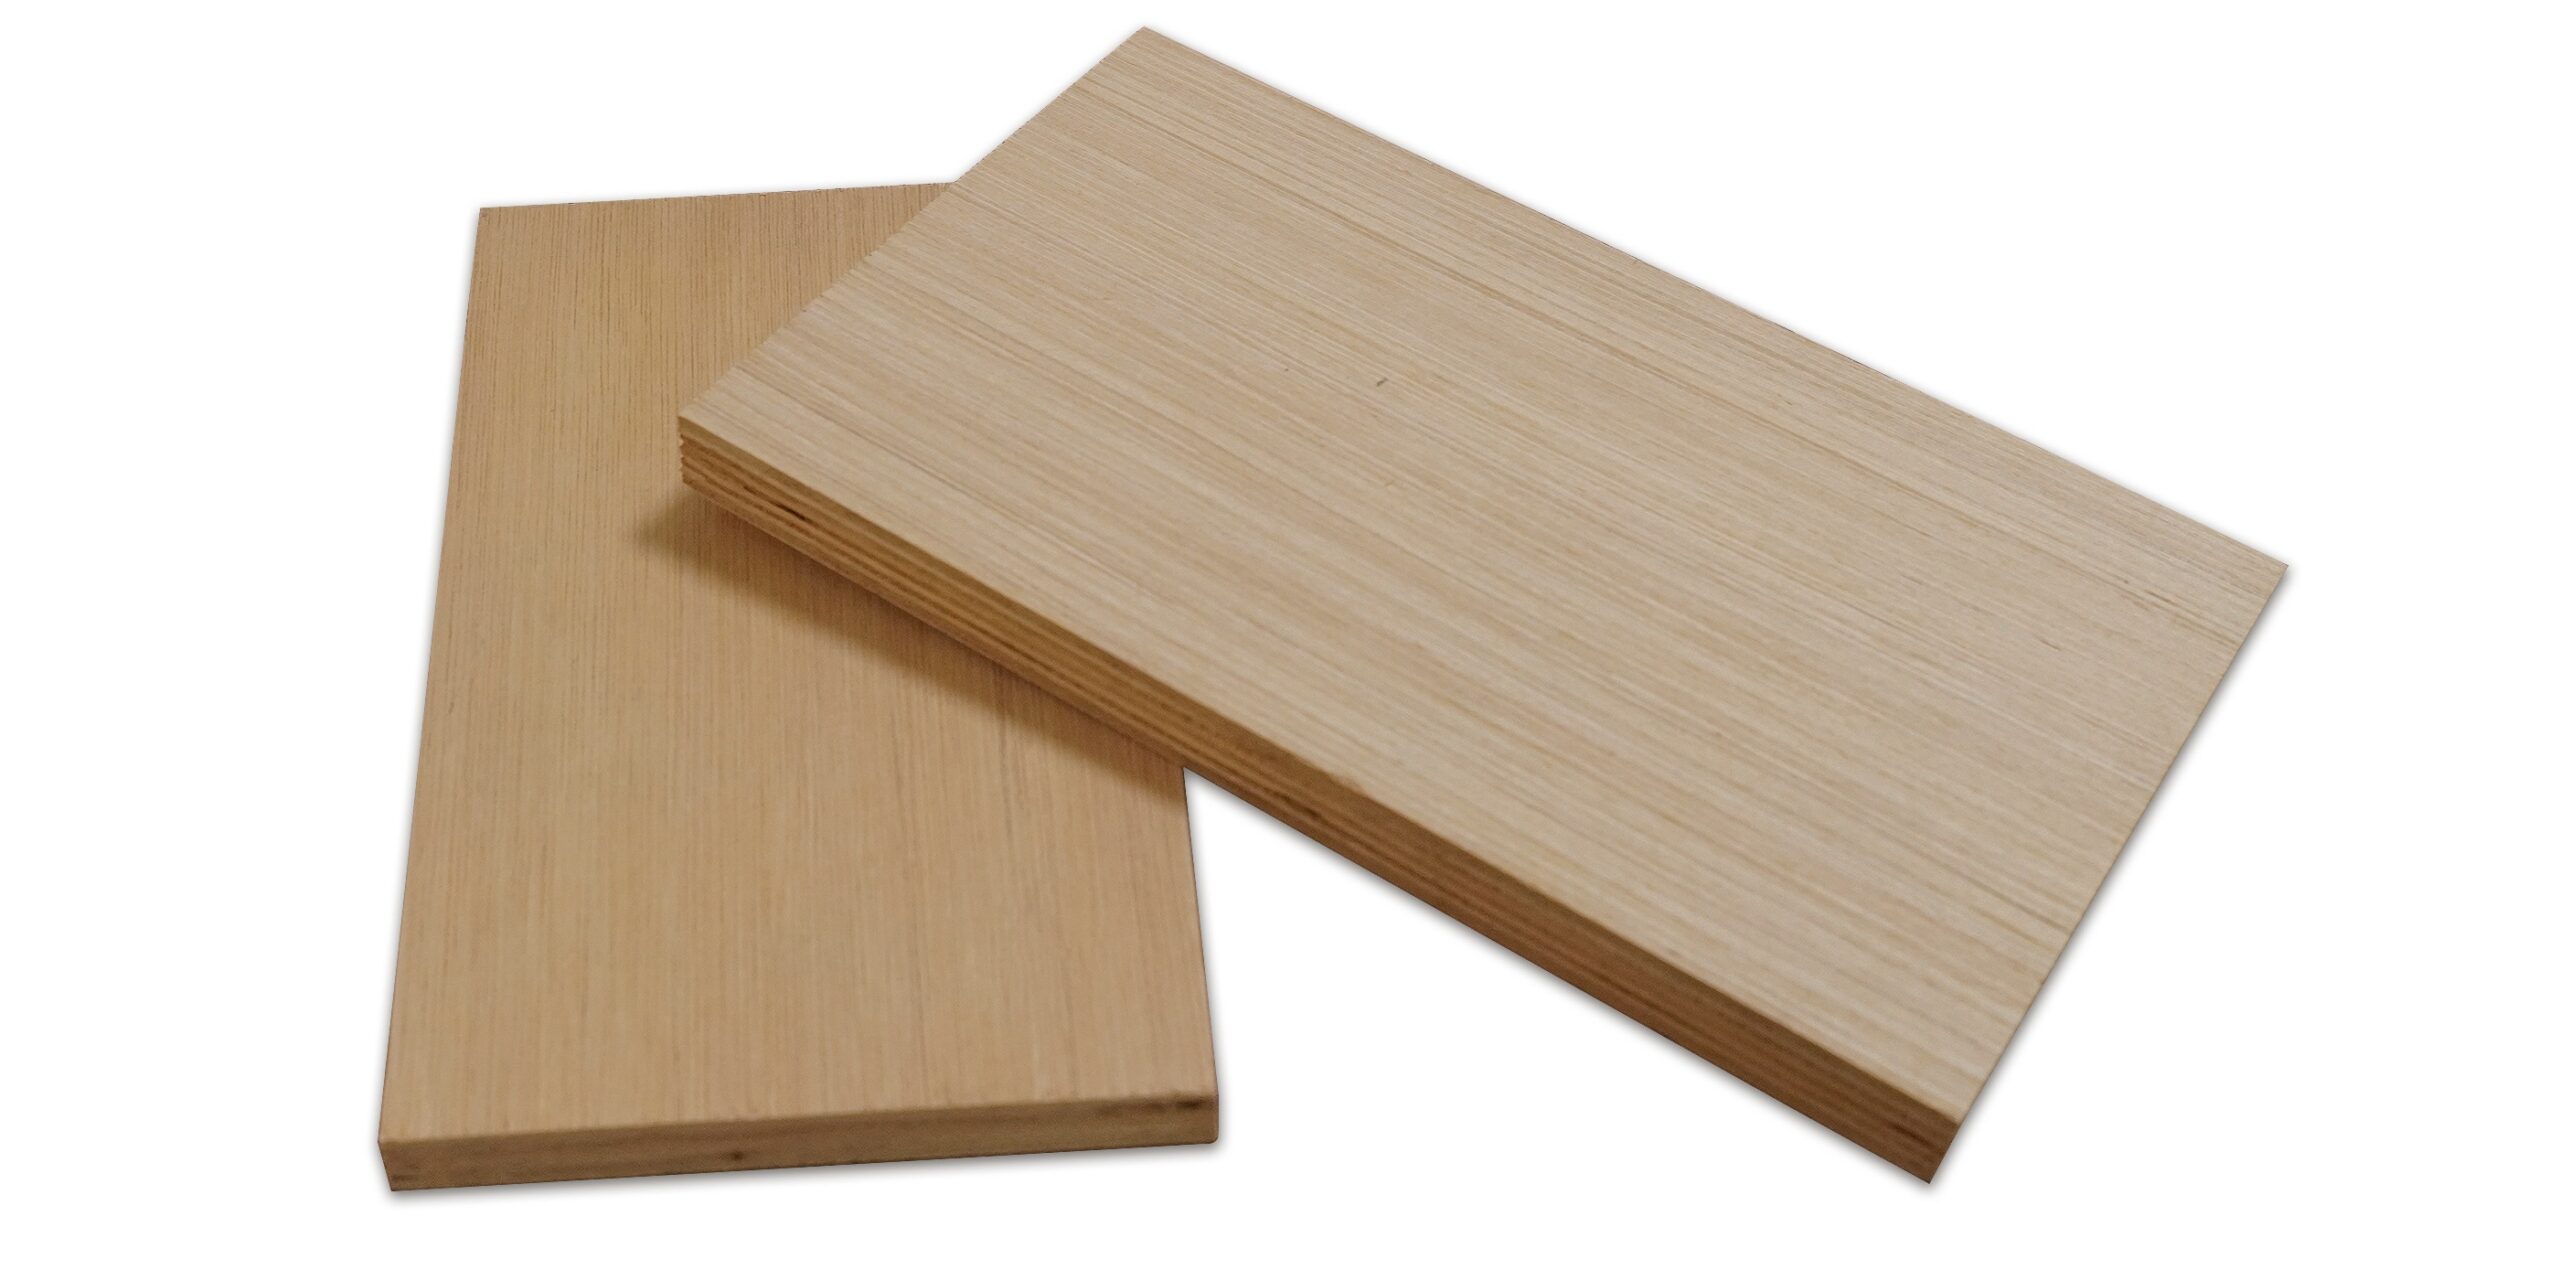 Common Practical Uses for Plywood